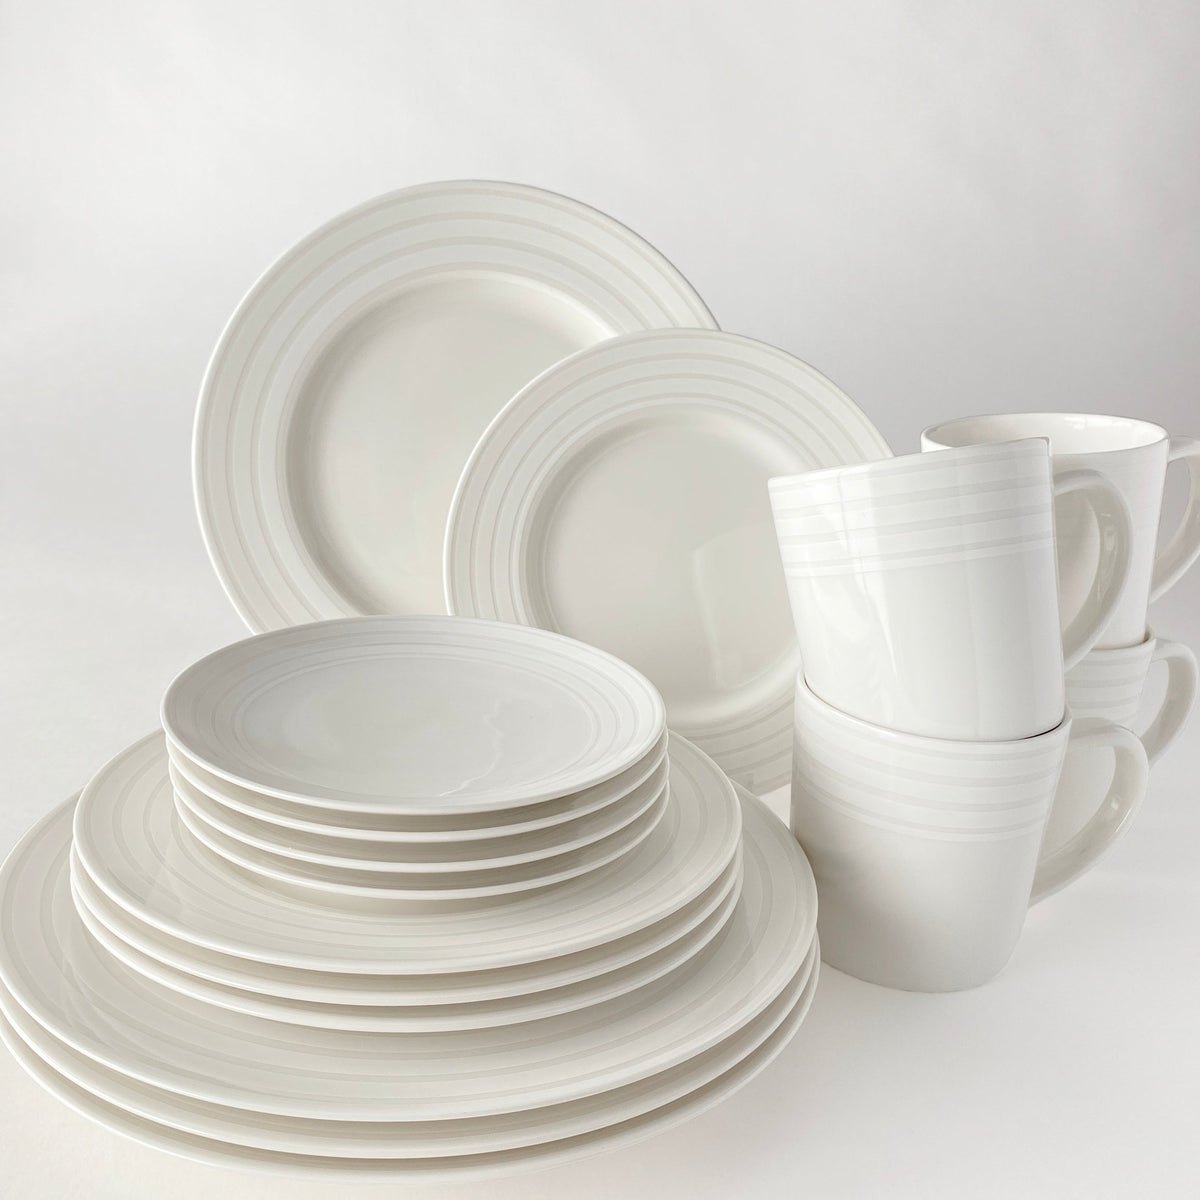 Introducing the Caskata Artisanal Home Cambridge Stripe Canapé Plates, crafted from high-fired porcelain. This elegant white set includes cups and saucers, showcasing a versatile stripe pattern that will elevate any dining experience.